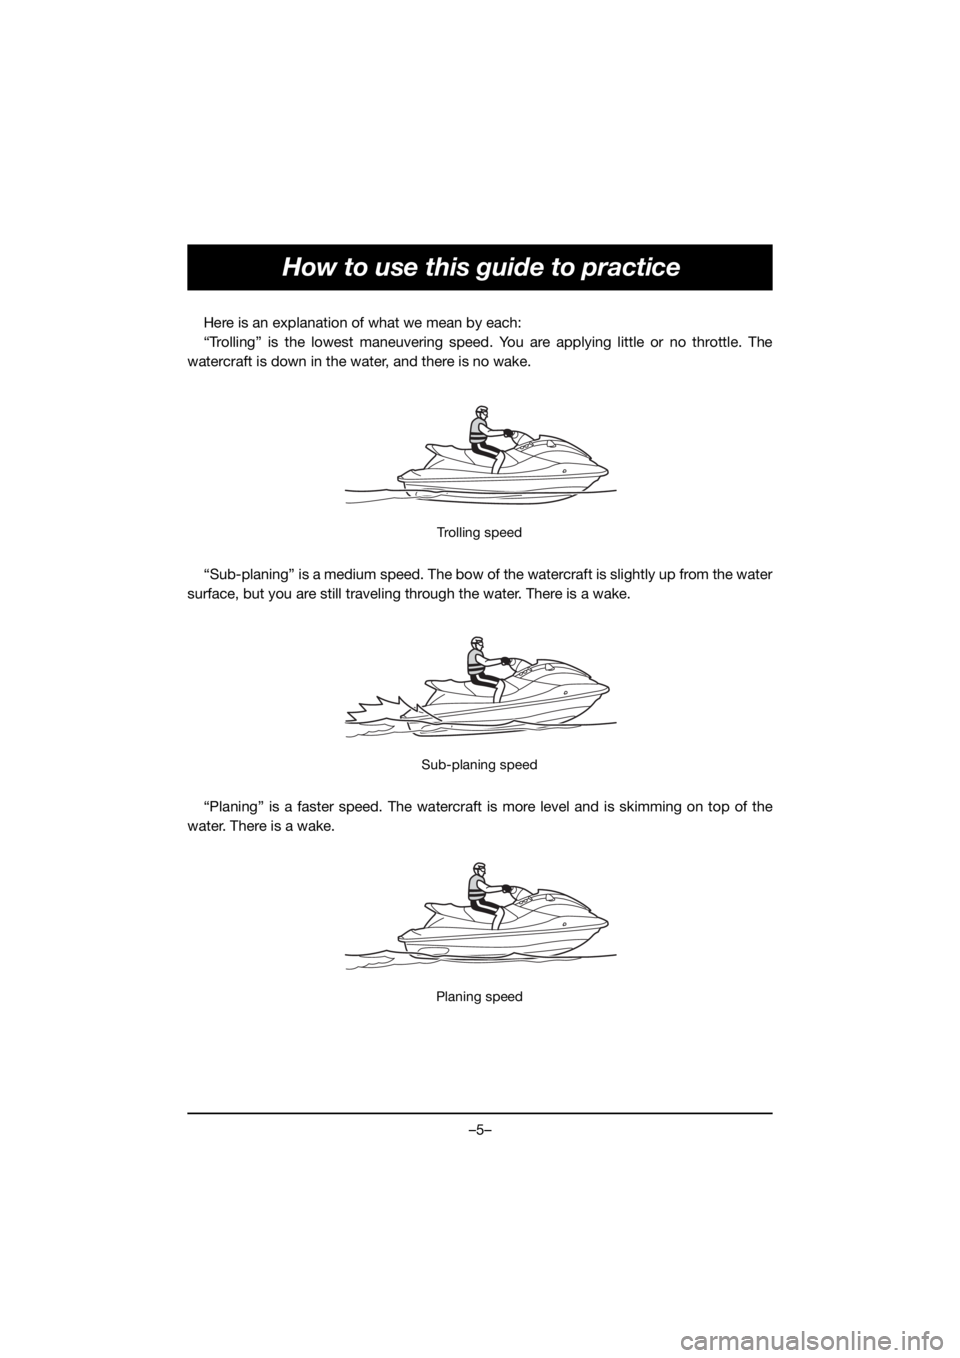 YAMAHA VX CRUISER HO 2021  Manual de utilização (in Portuguese) –5–
How to use this guide to practice
Here is an explanation of what we mean by each:
“Trolling” is the lowest maneuvering speed. You are applying little or no throttle. The
watercraft is down